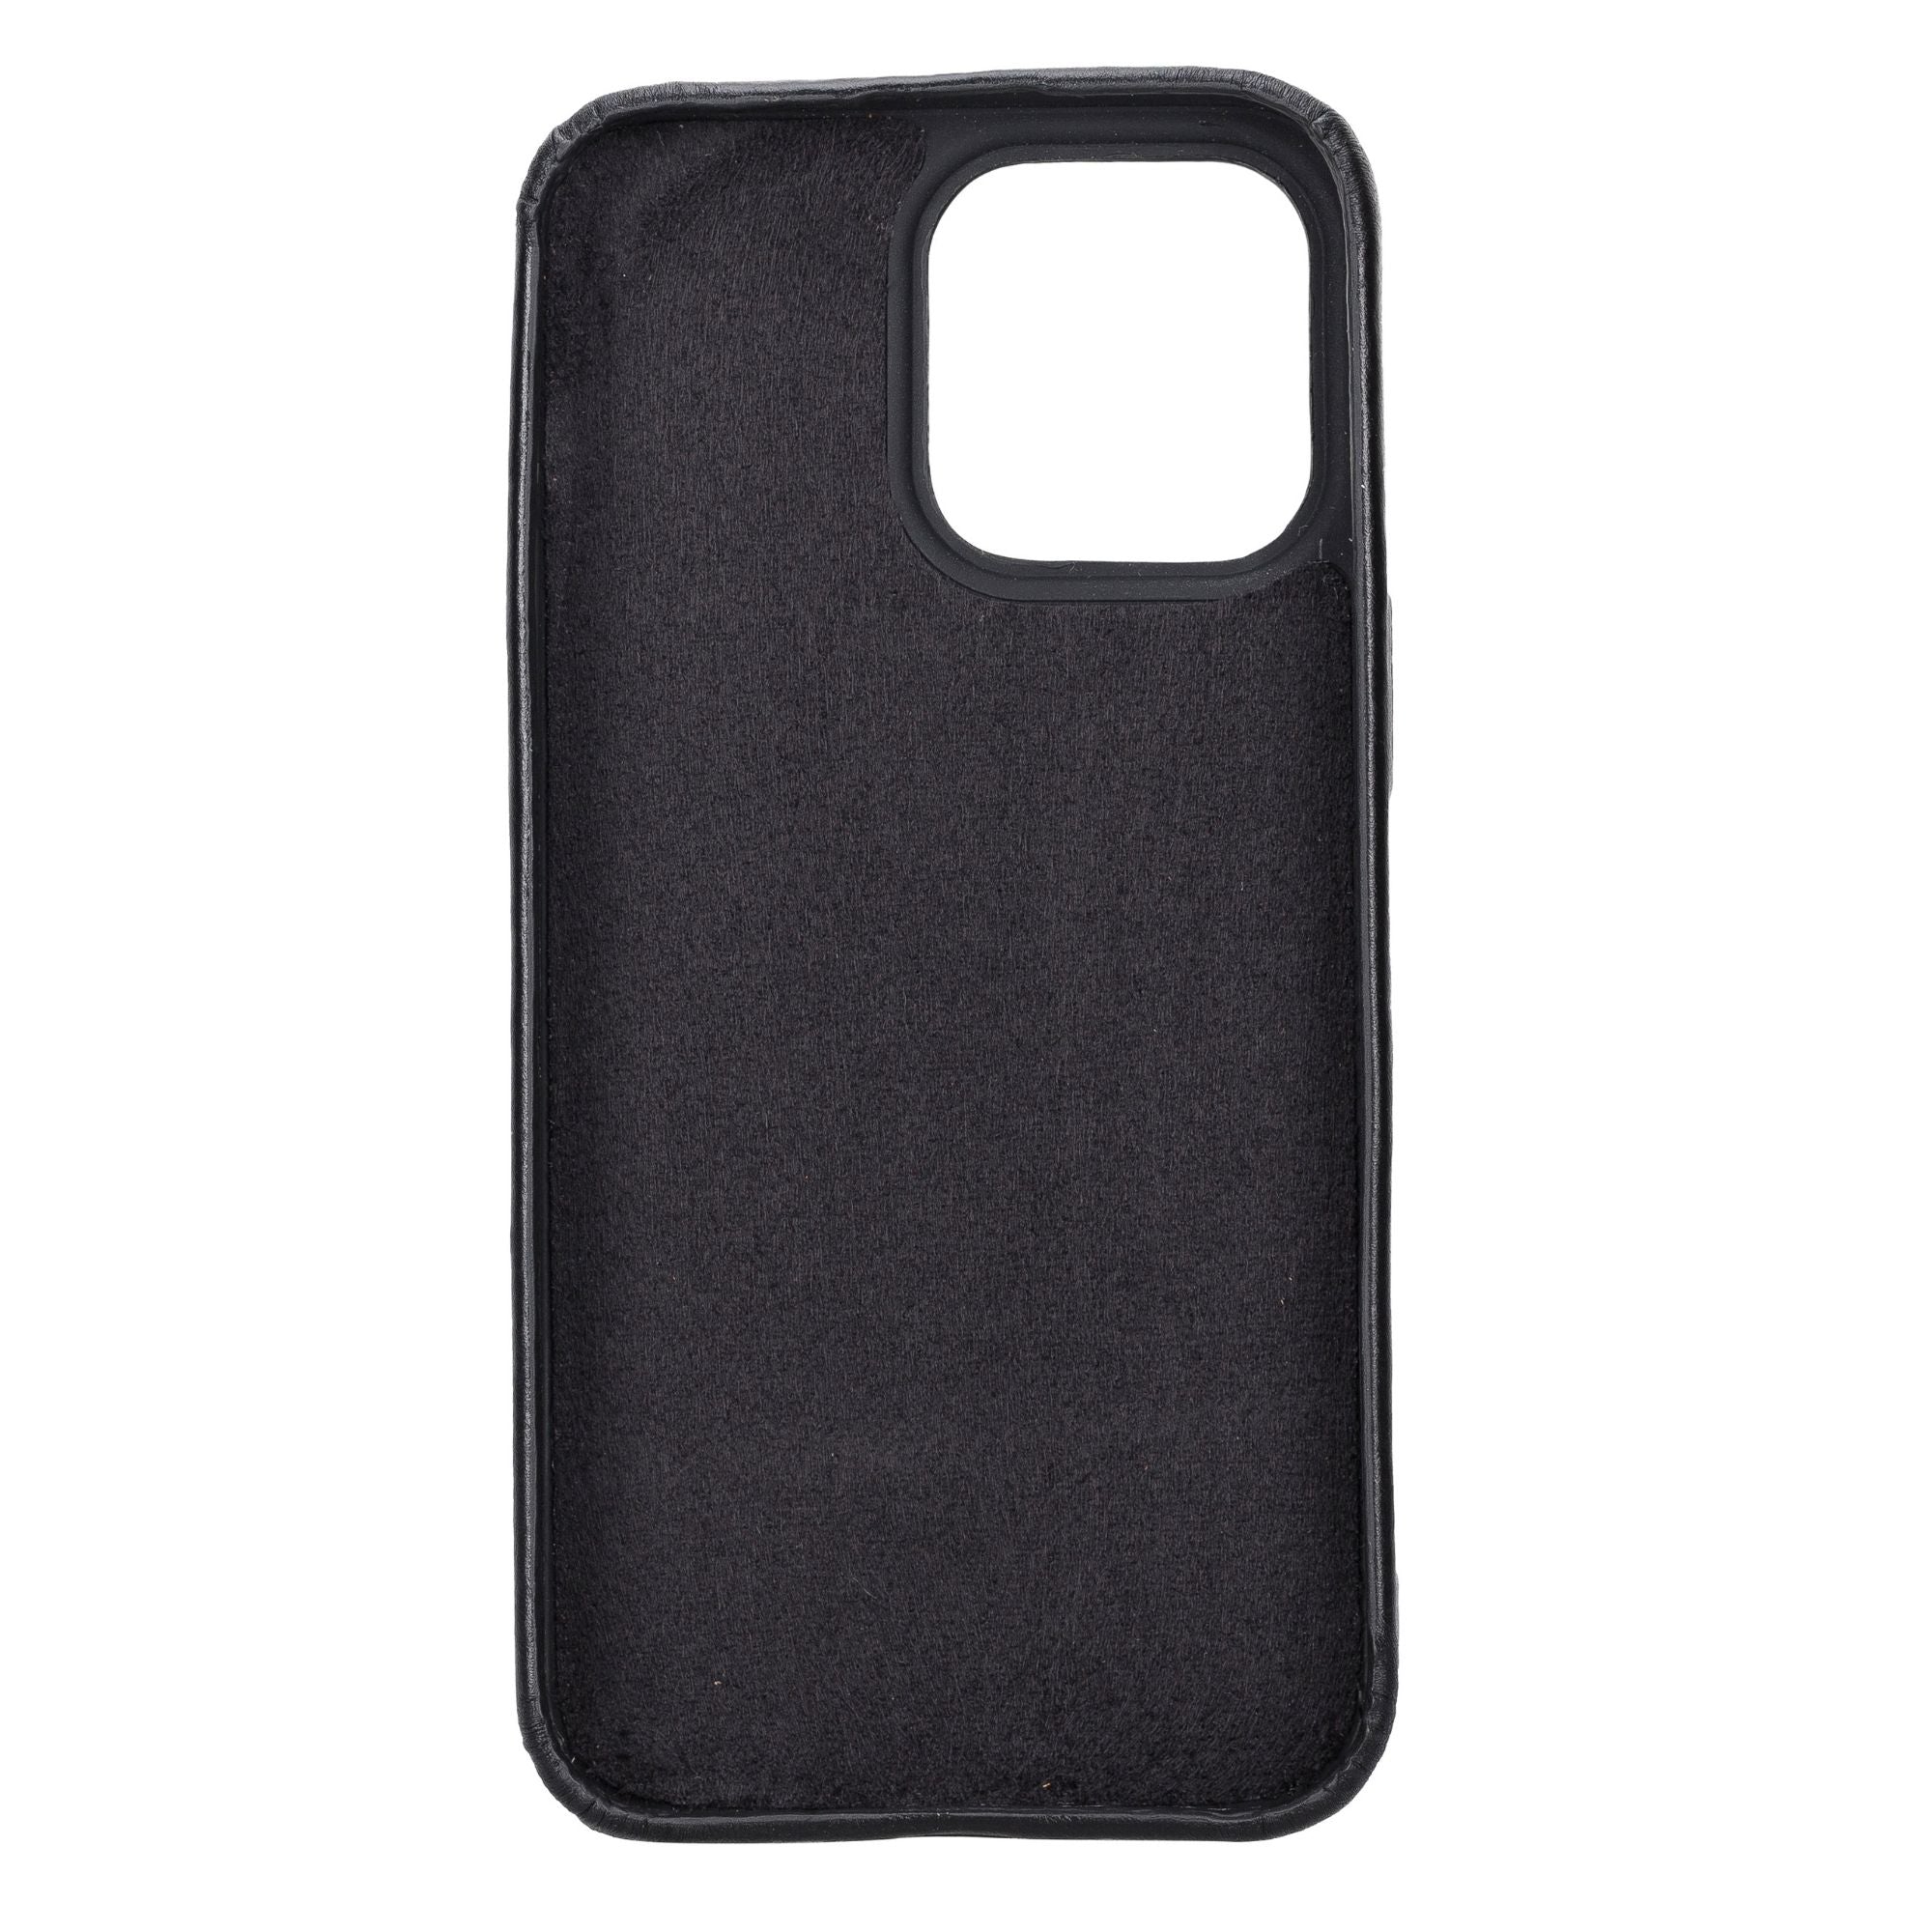 Pinedale Leather Snap-on Case for iPhone 12 Series - iPhone 12 Pro Max - Black - TORONATA